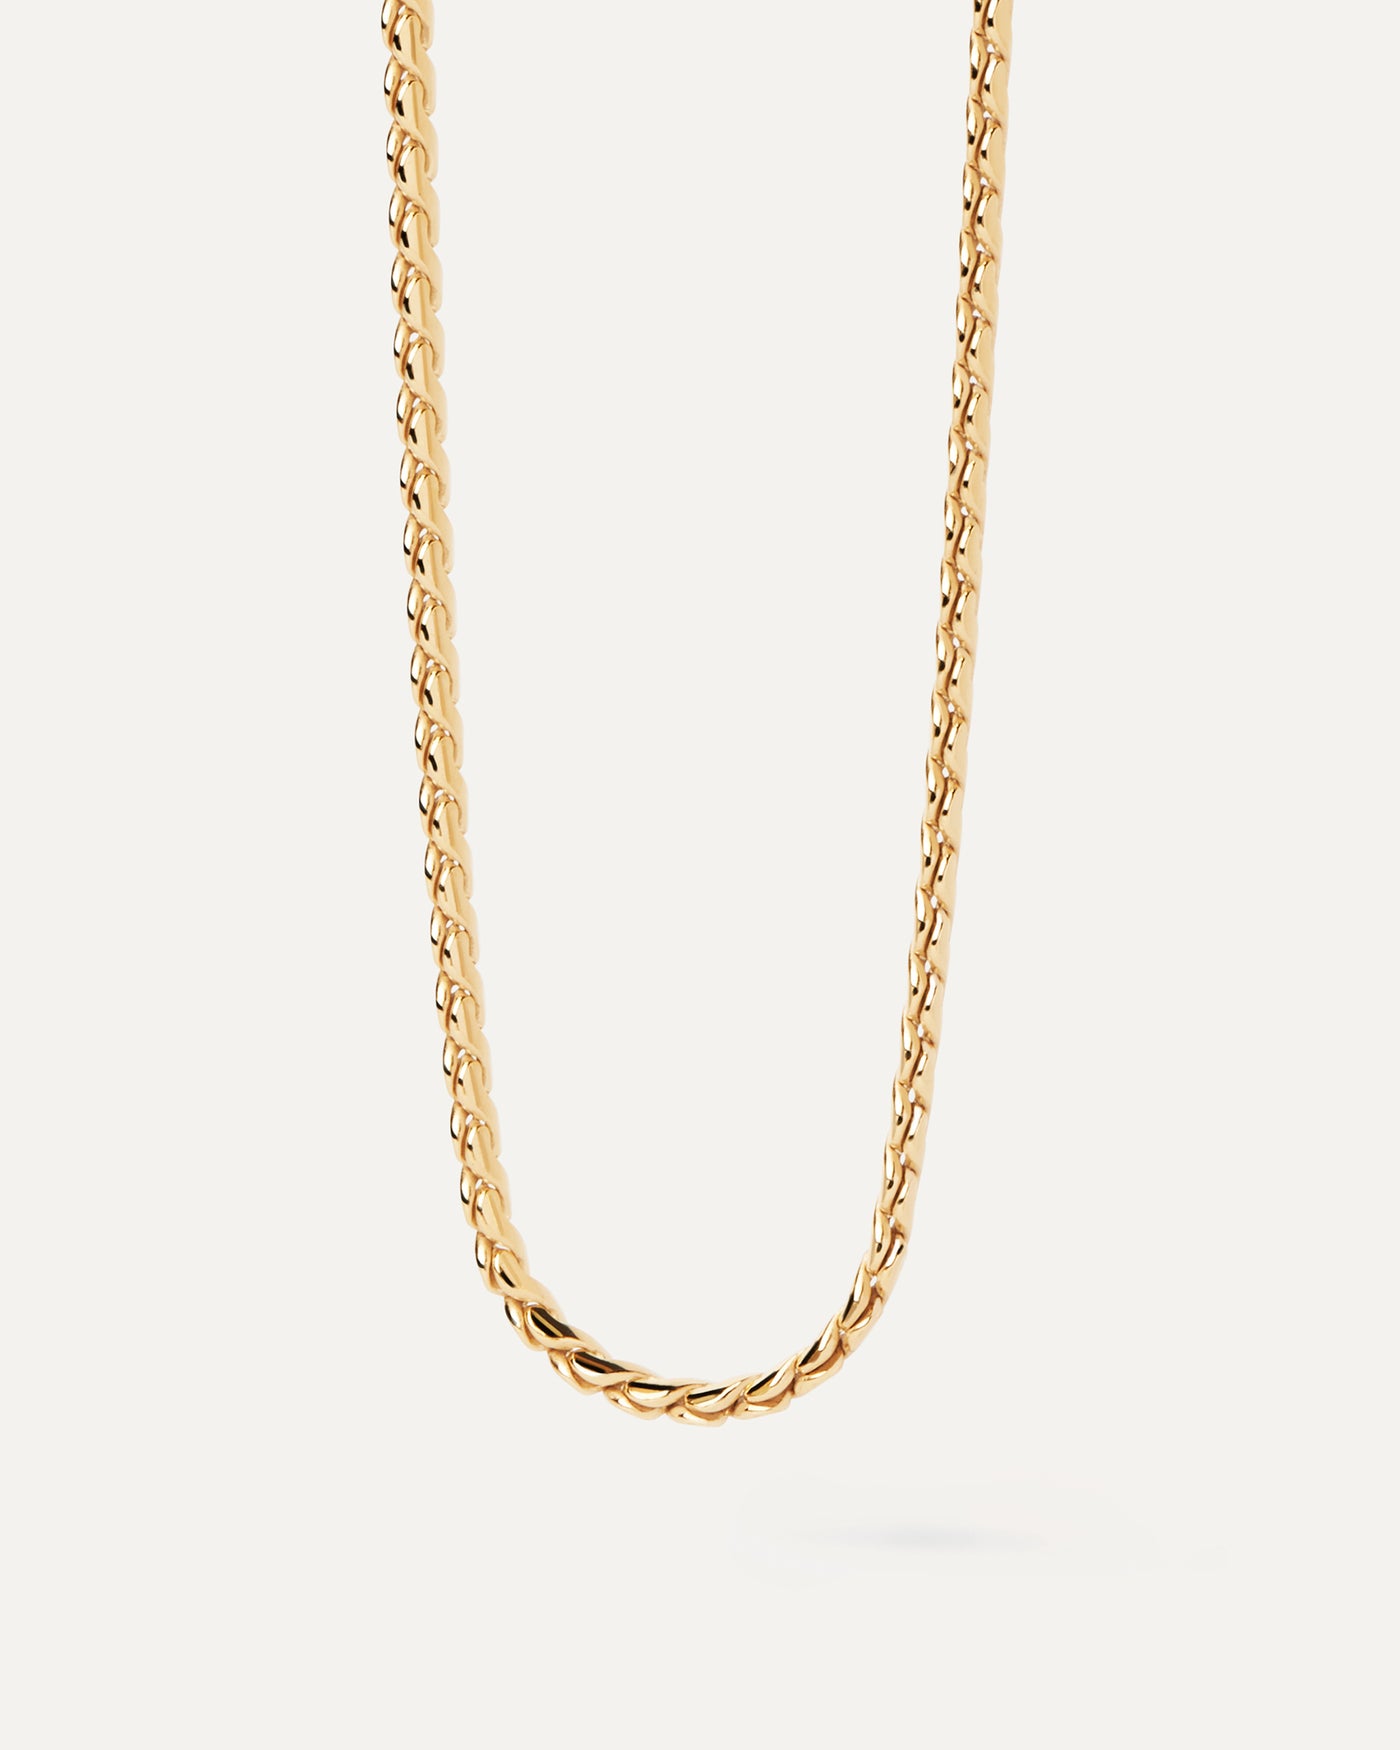 2023 Selection | Large Serpentine Chain Necklace. Modern gold-plated serpentine thick chain necklace with braided links. Get the latest arrival from PDPAOLA. Place your order safely and get this Best Seller. Free Shipping.